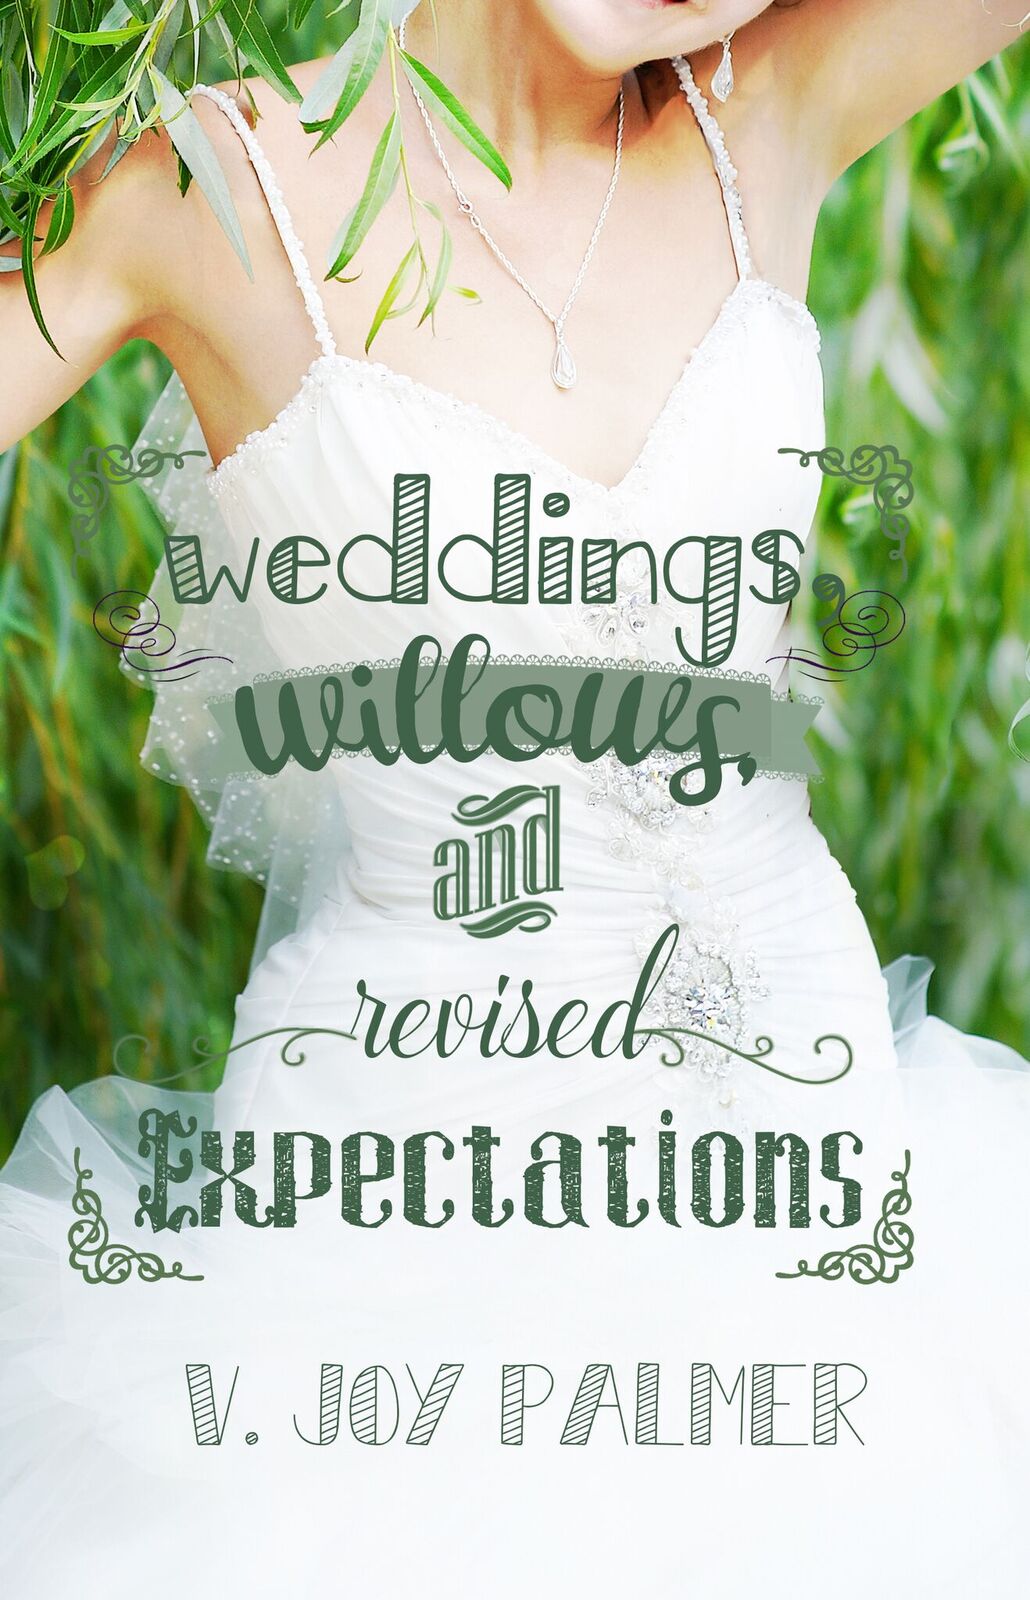 Weddings Willows and Revised Expectations